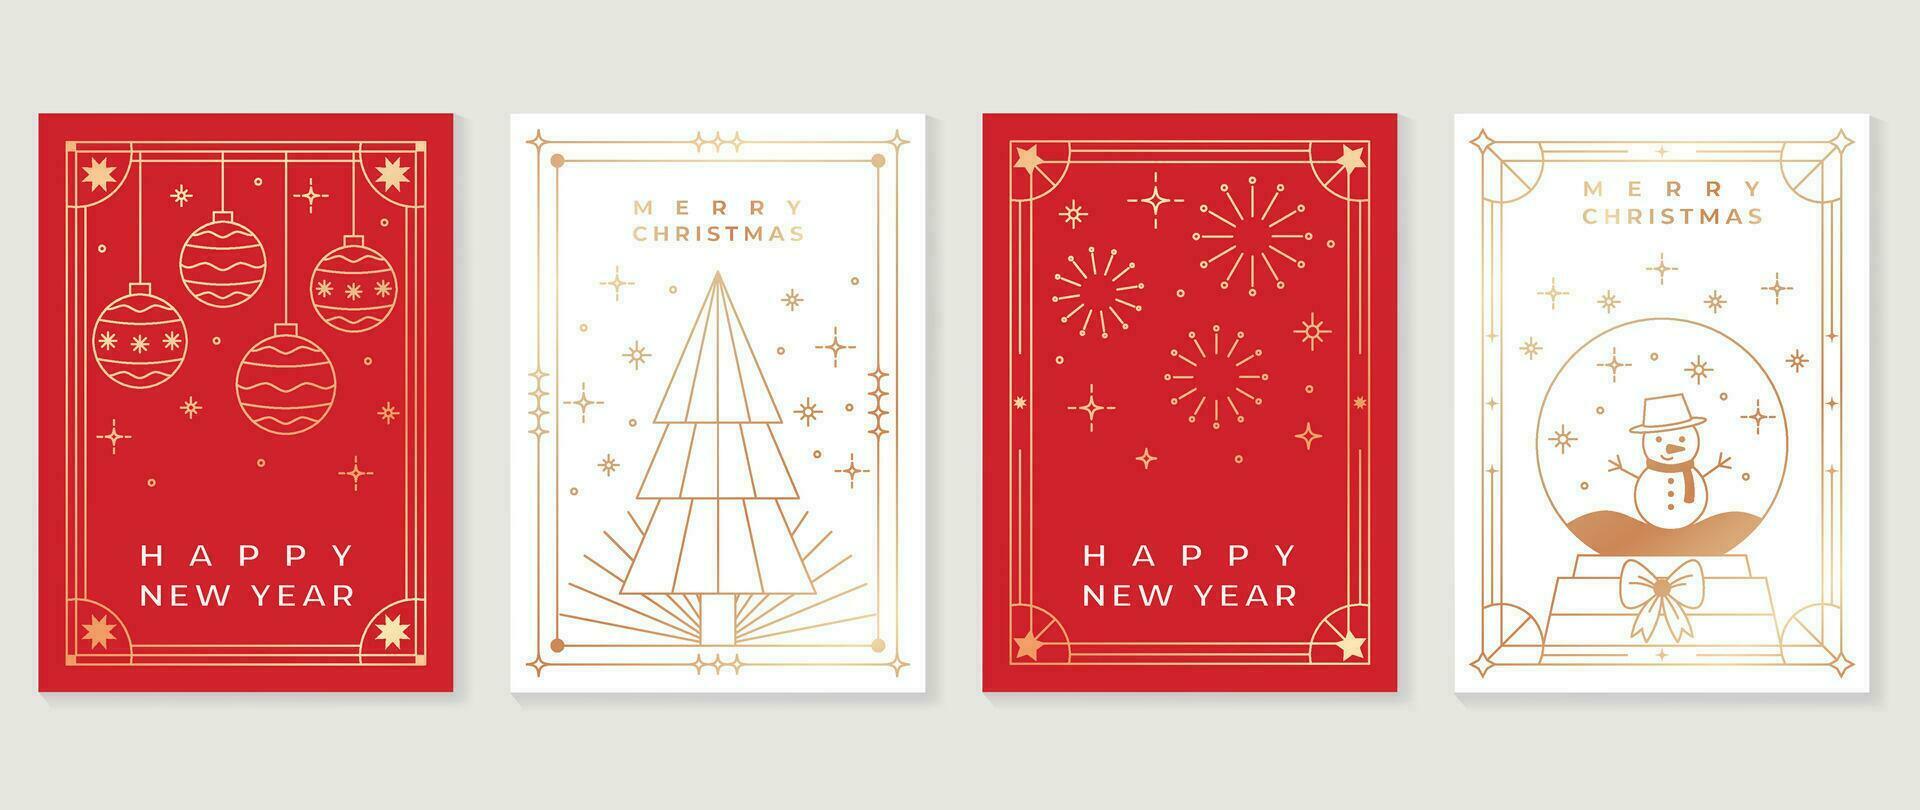 Luxury christmas invitation card art deco design vector. Christmas tree, bauble ball, firework, snowman line art on white and red background. Design illustration for cover, poster, wallpaper. vector